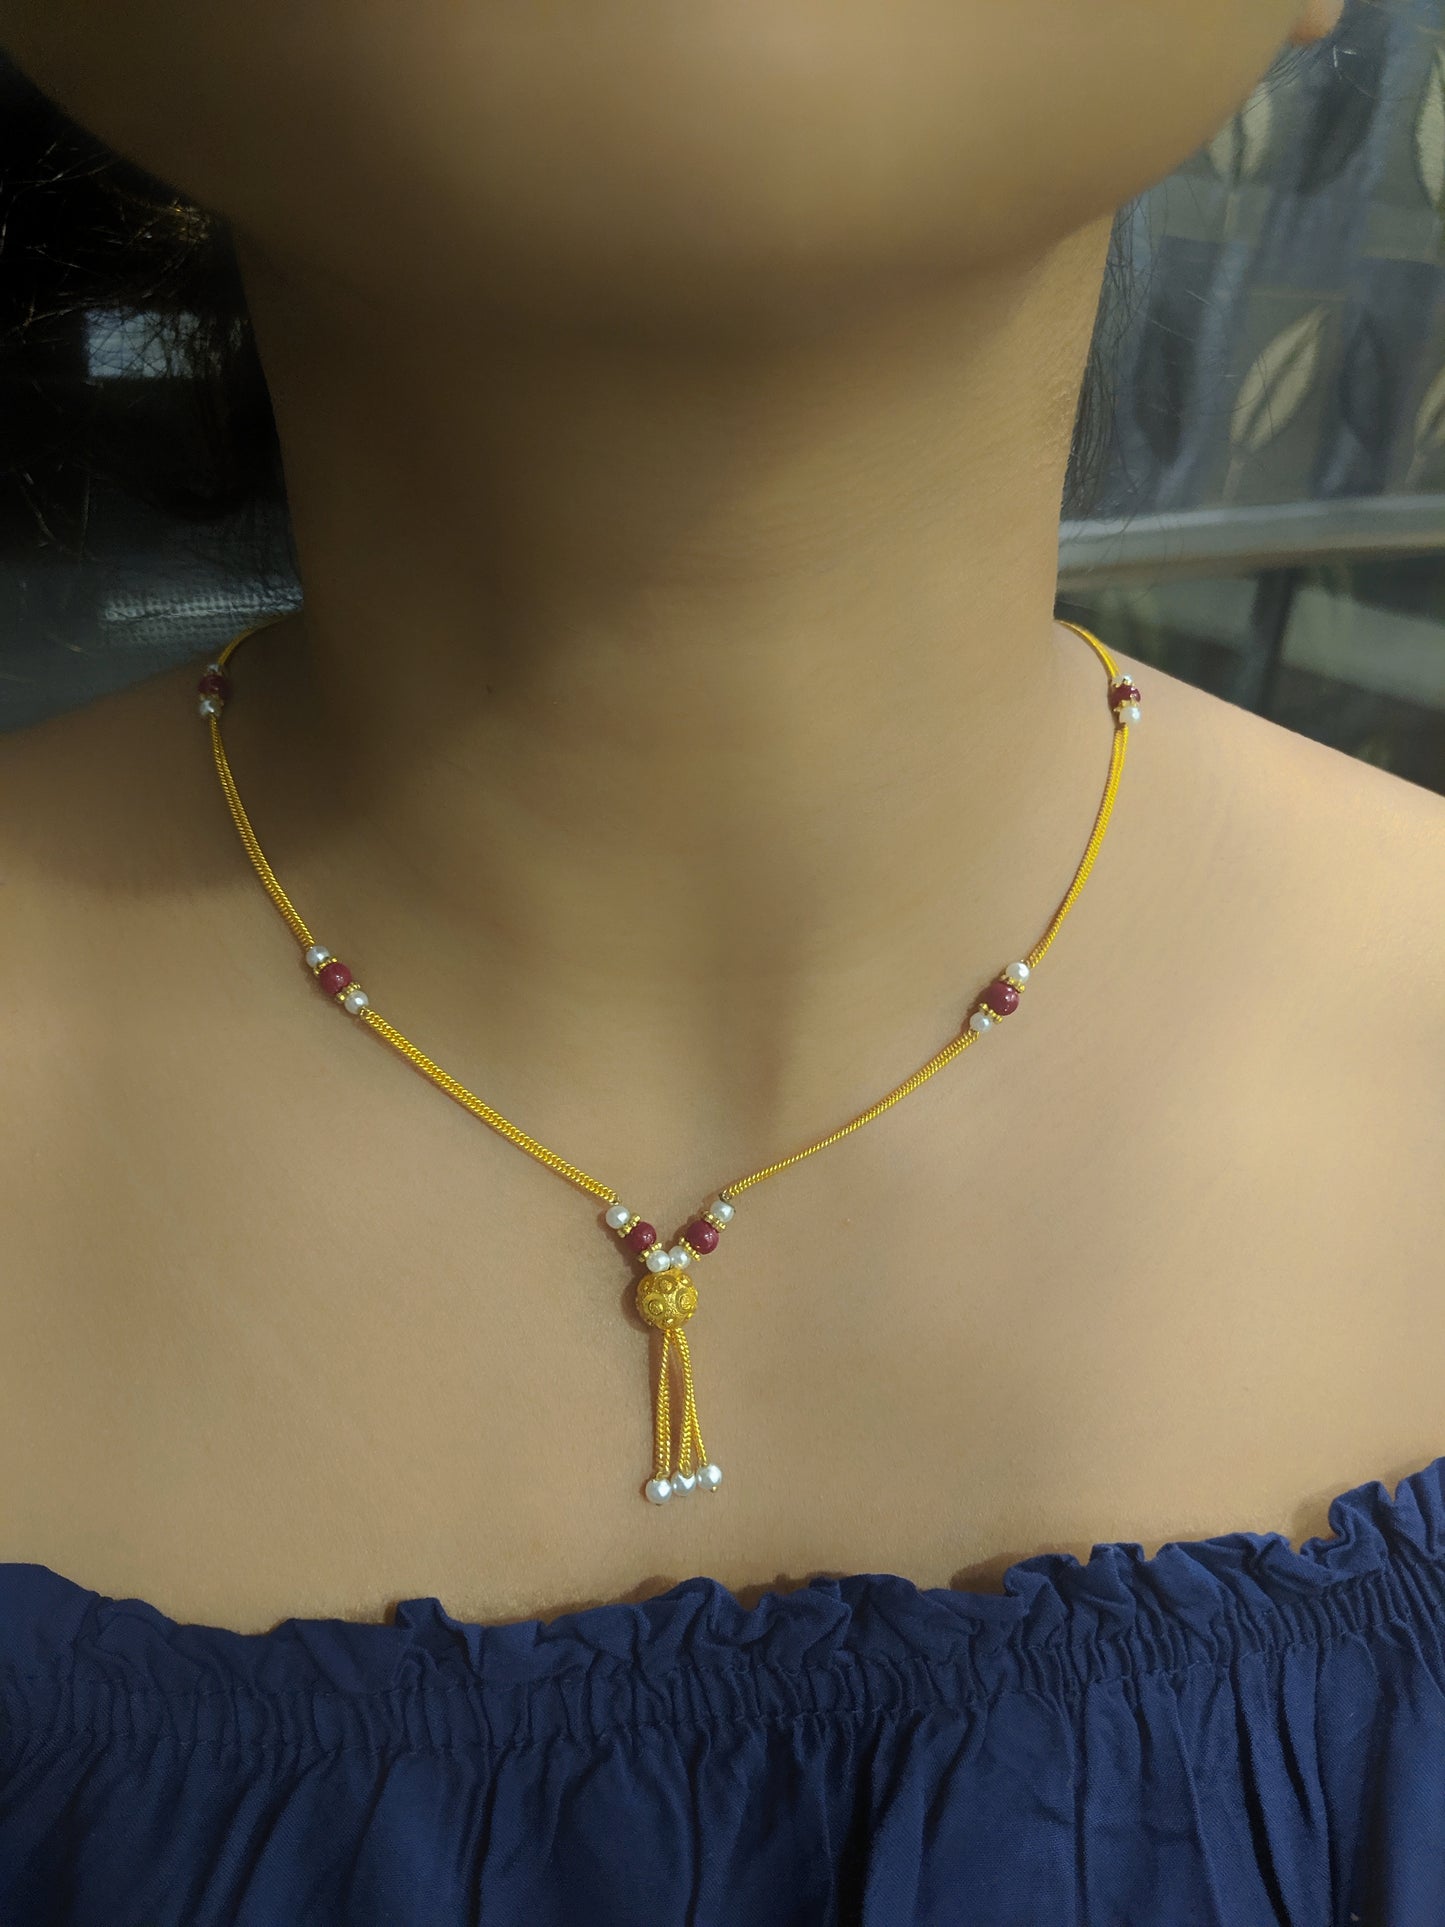 Digital Dress Room Short Mangalsutra Designs Gold Plated Latest Red Mani Beads Single Line Layer Chain Mangalsutra